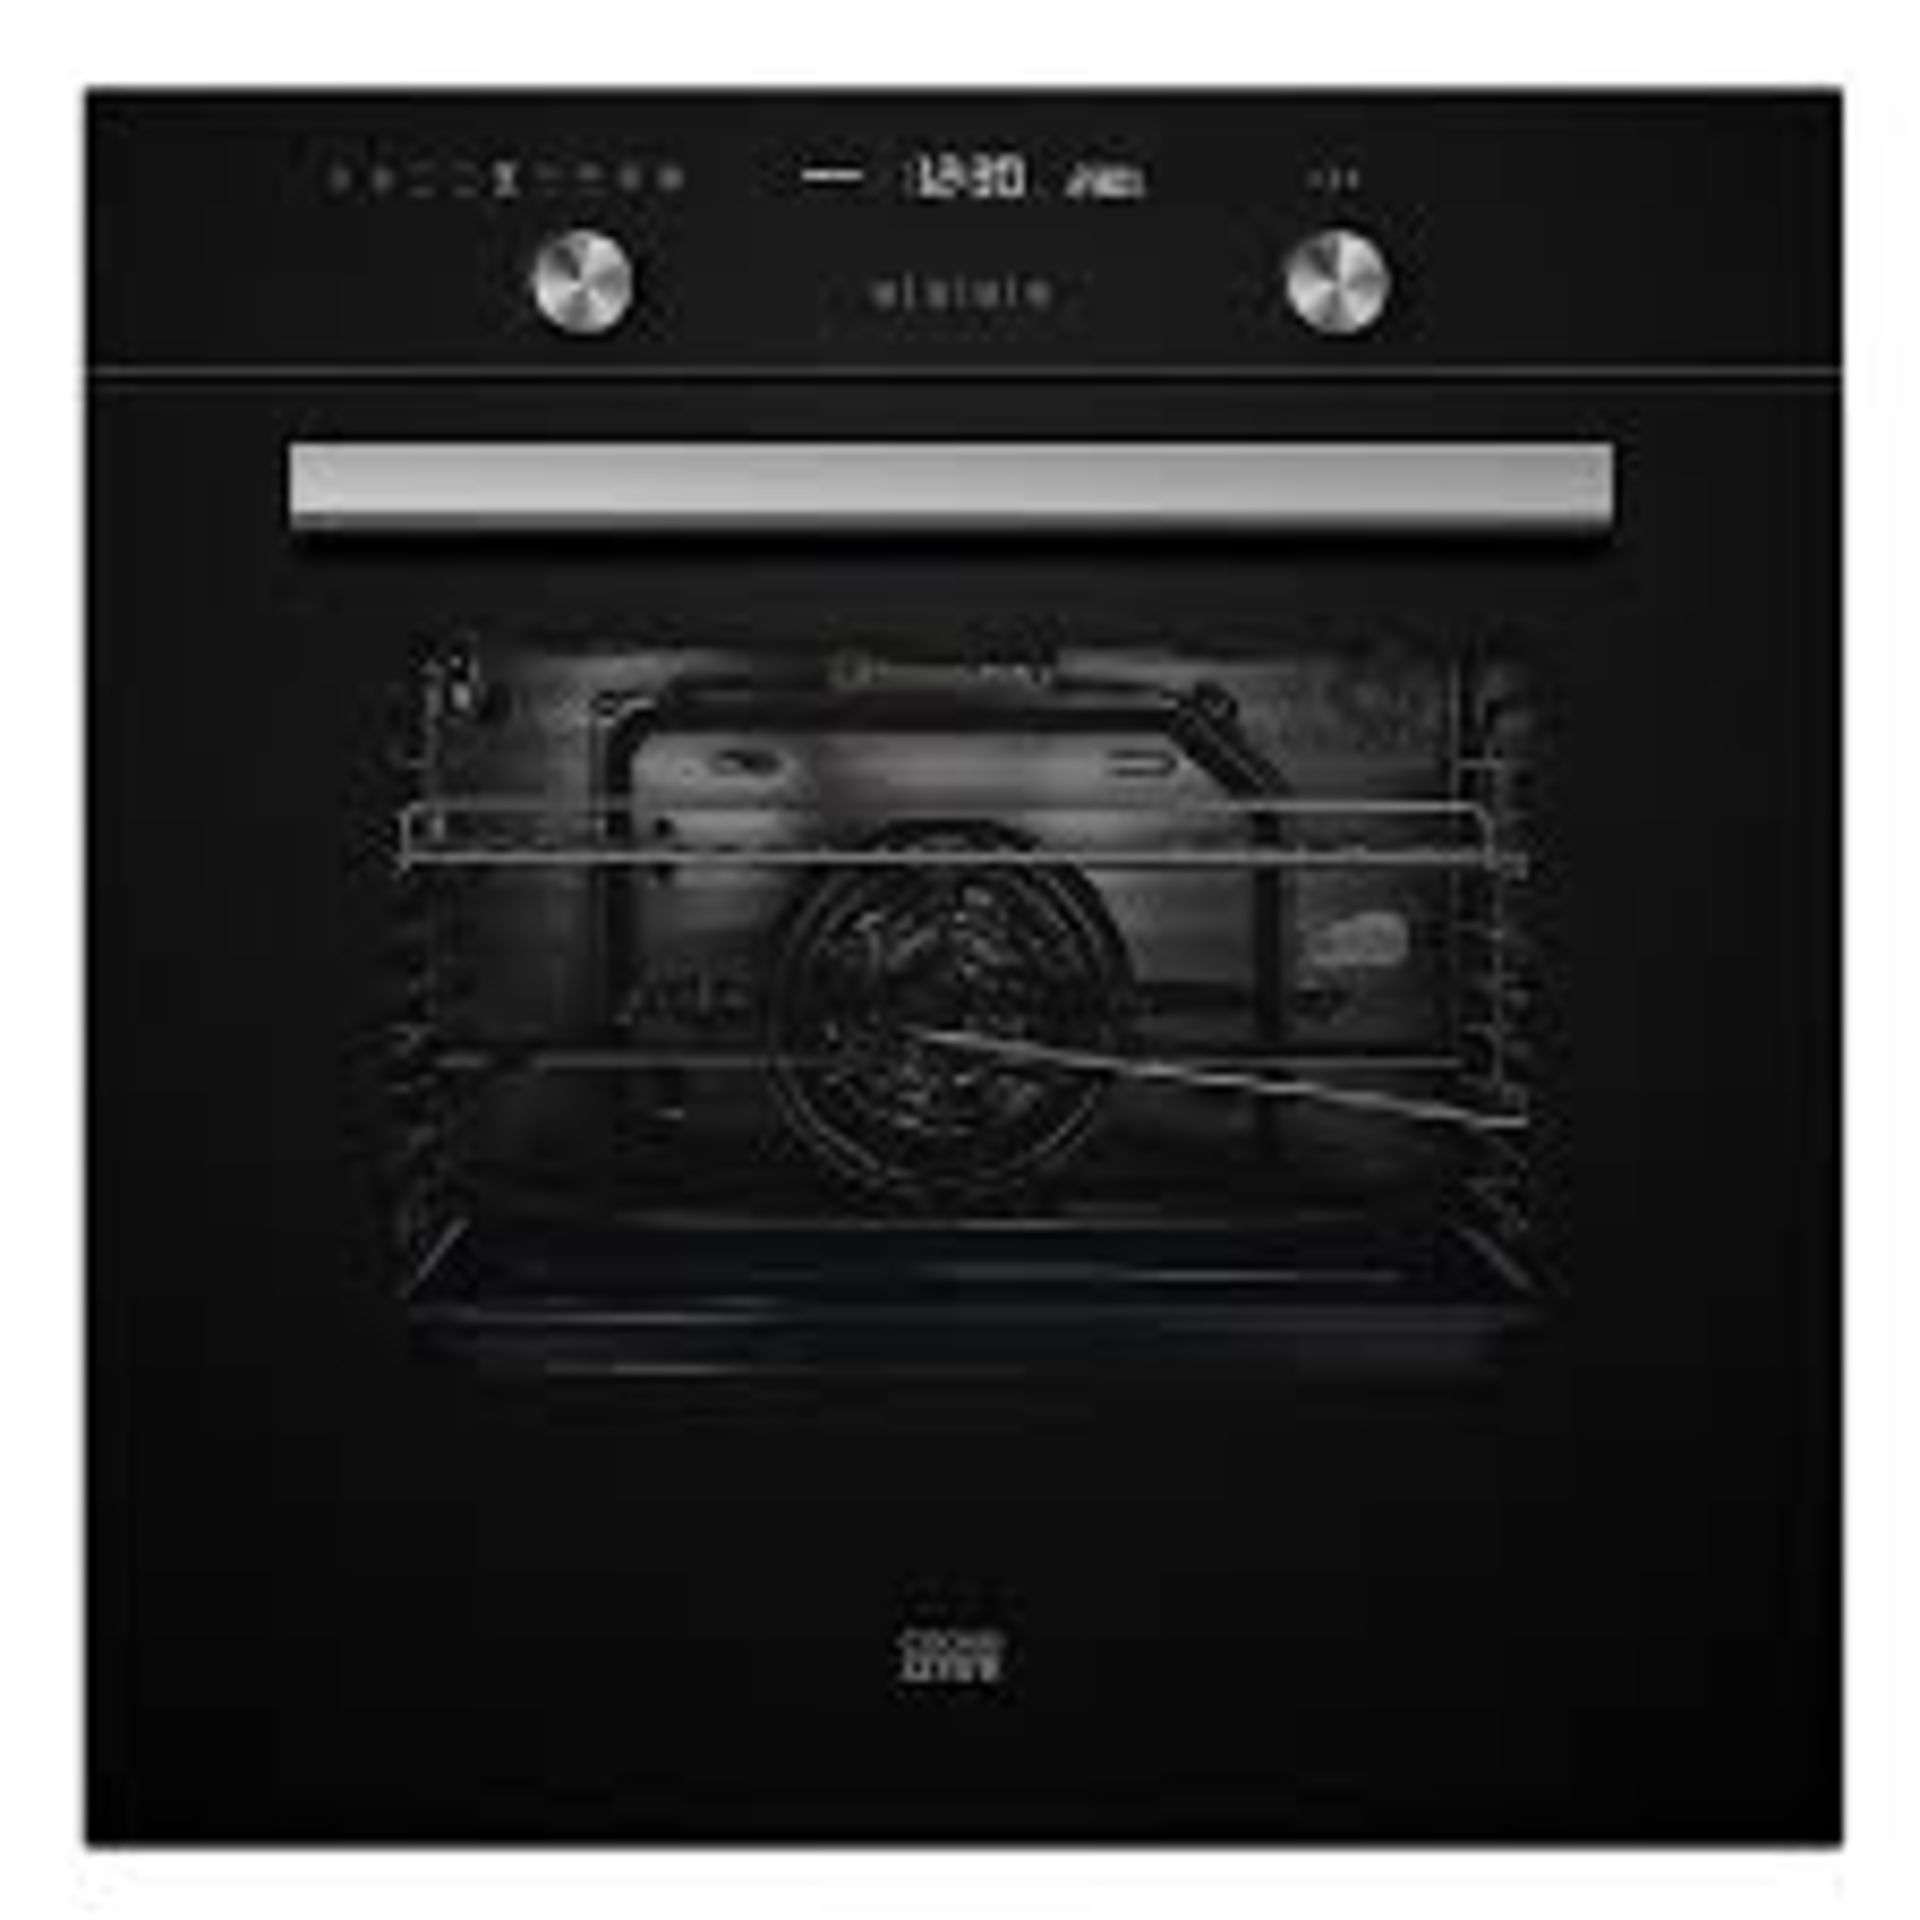 Cooke & Lewis CLMFBLa Built-in Single Multifunction Oven - Black. - R19.